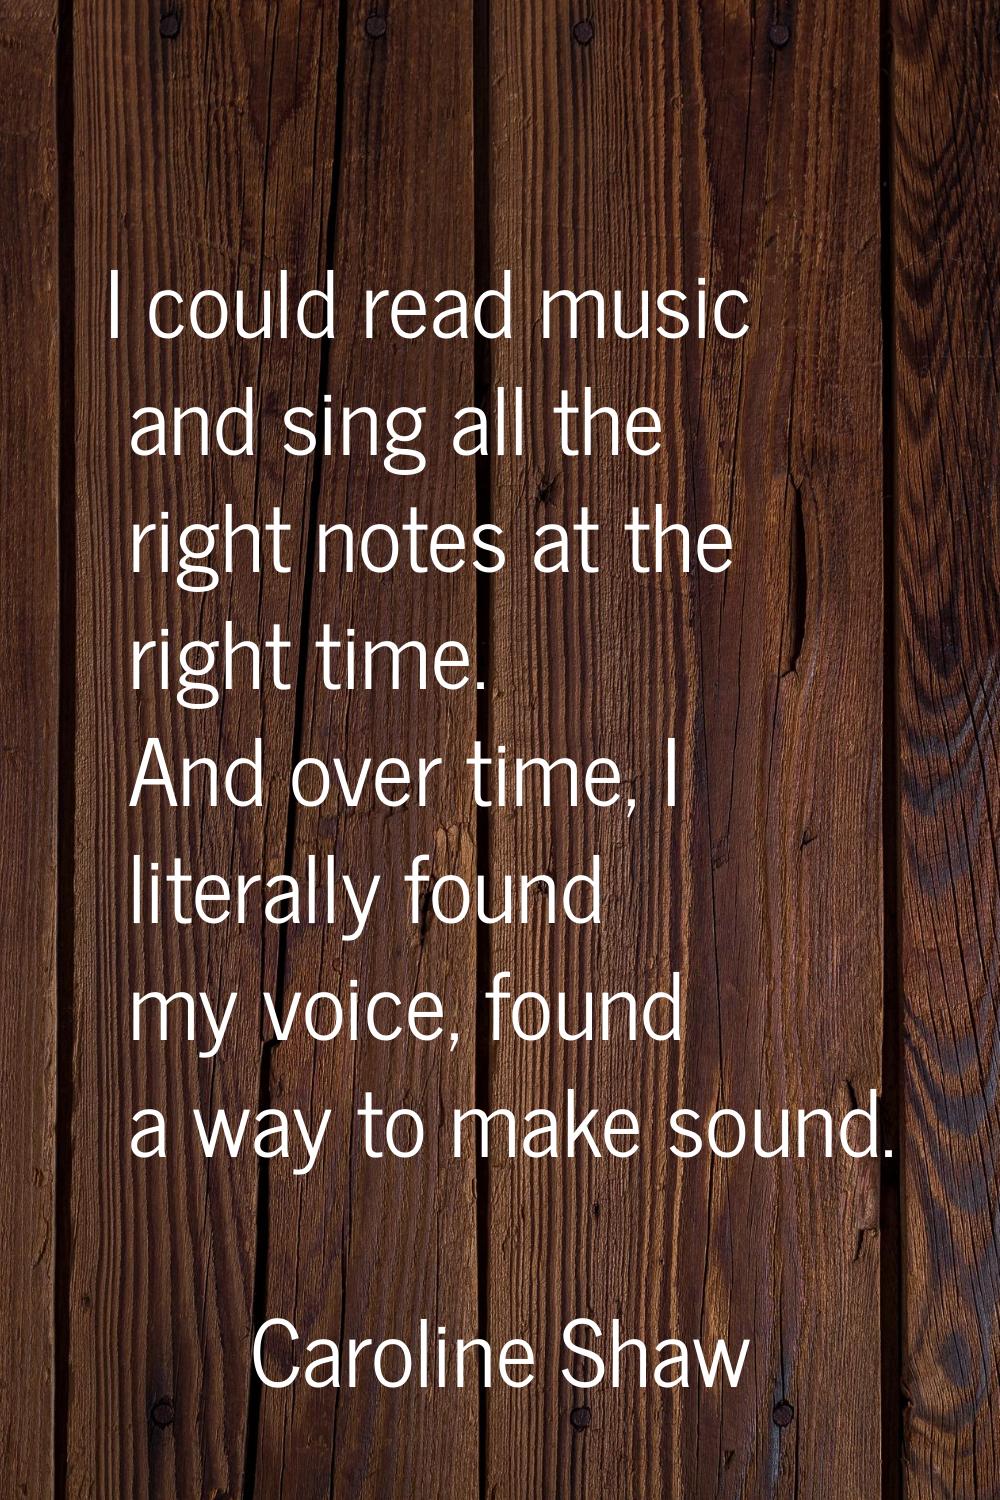 I could read music and sing all the right notes at the right time. And over time, I literally found